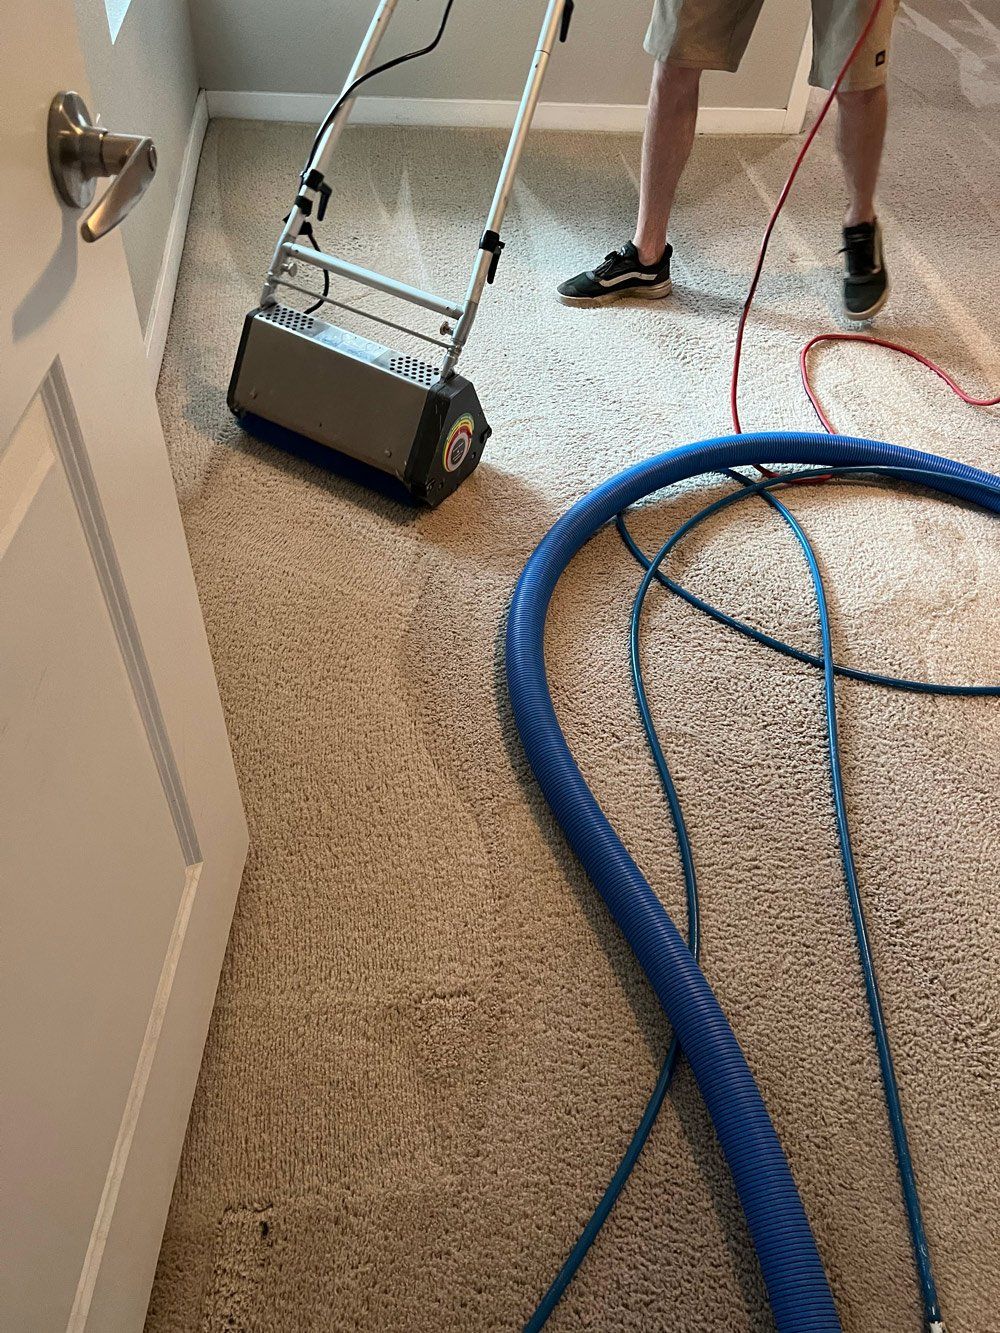 Professionals carpet cleaning a home in Queen Creek, AZ